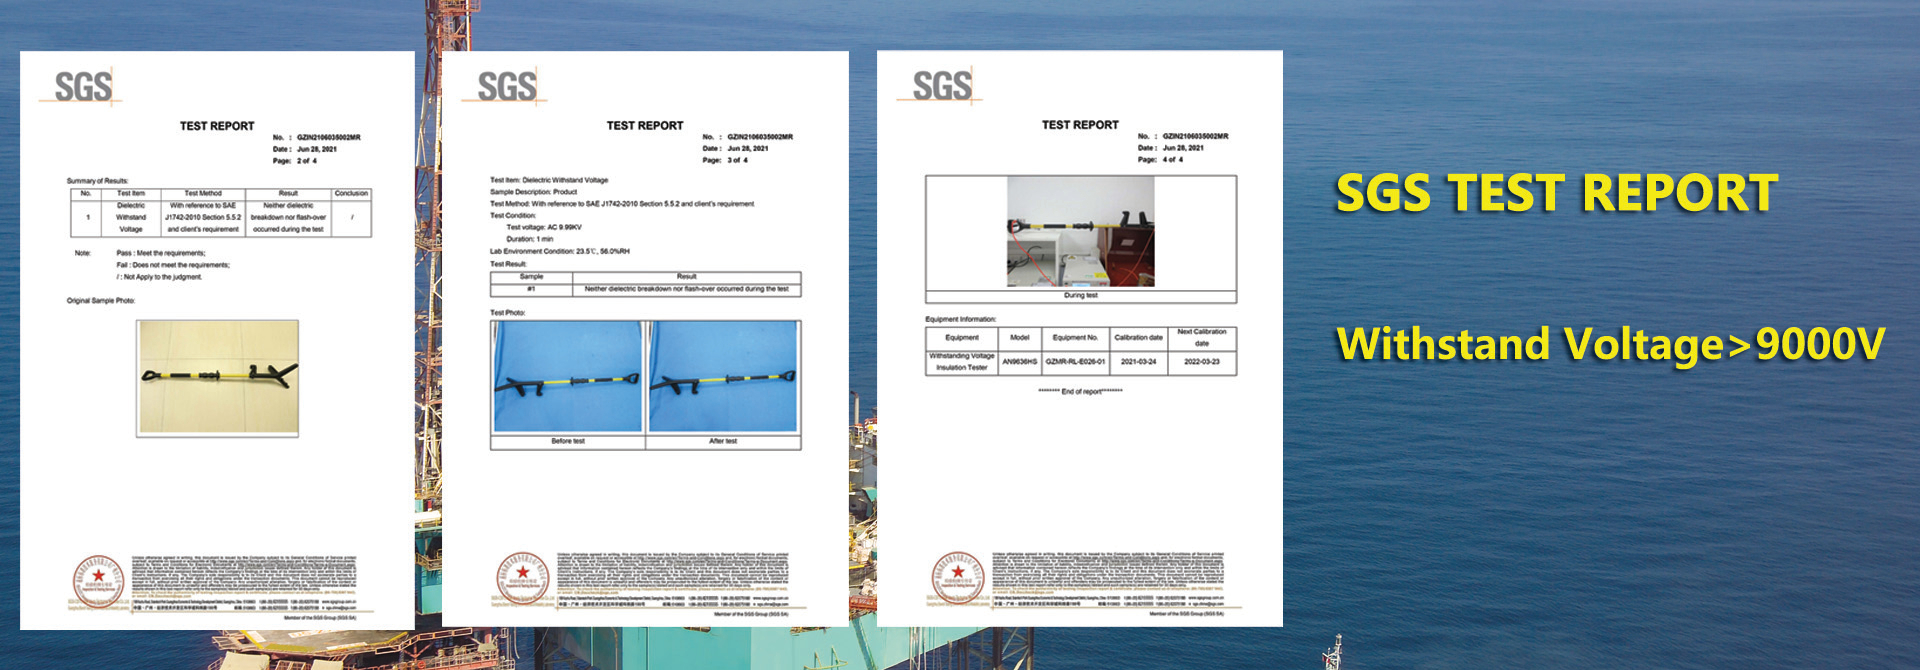 offshore handling tools SGS test